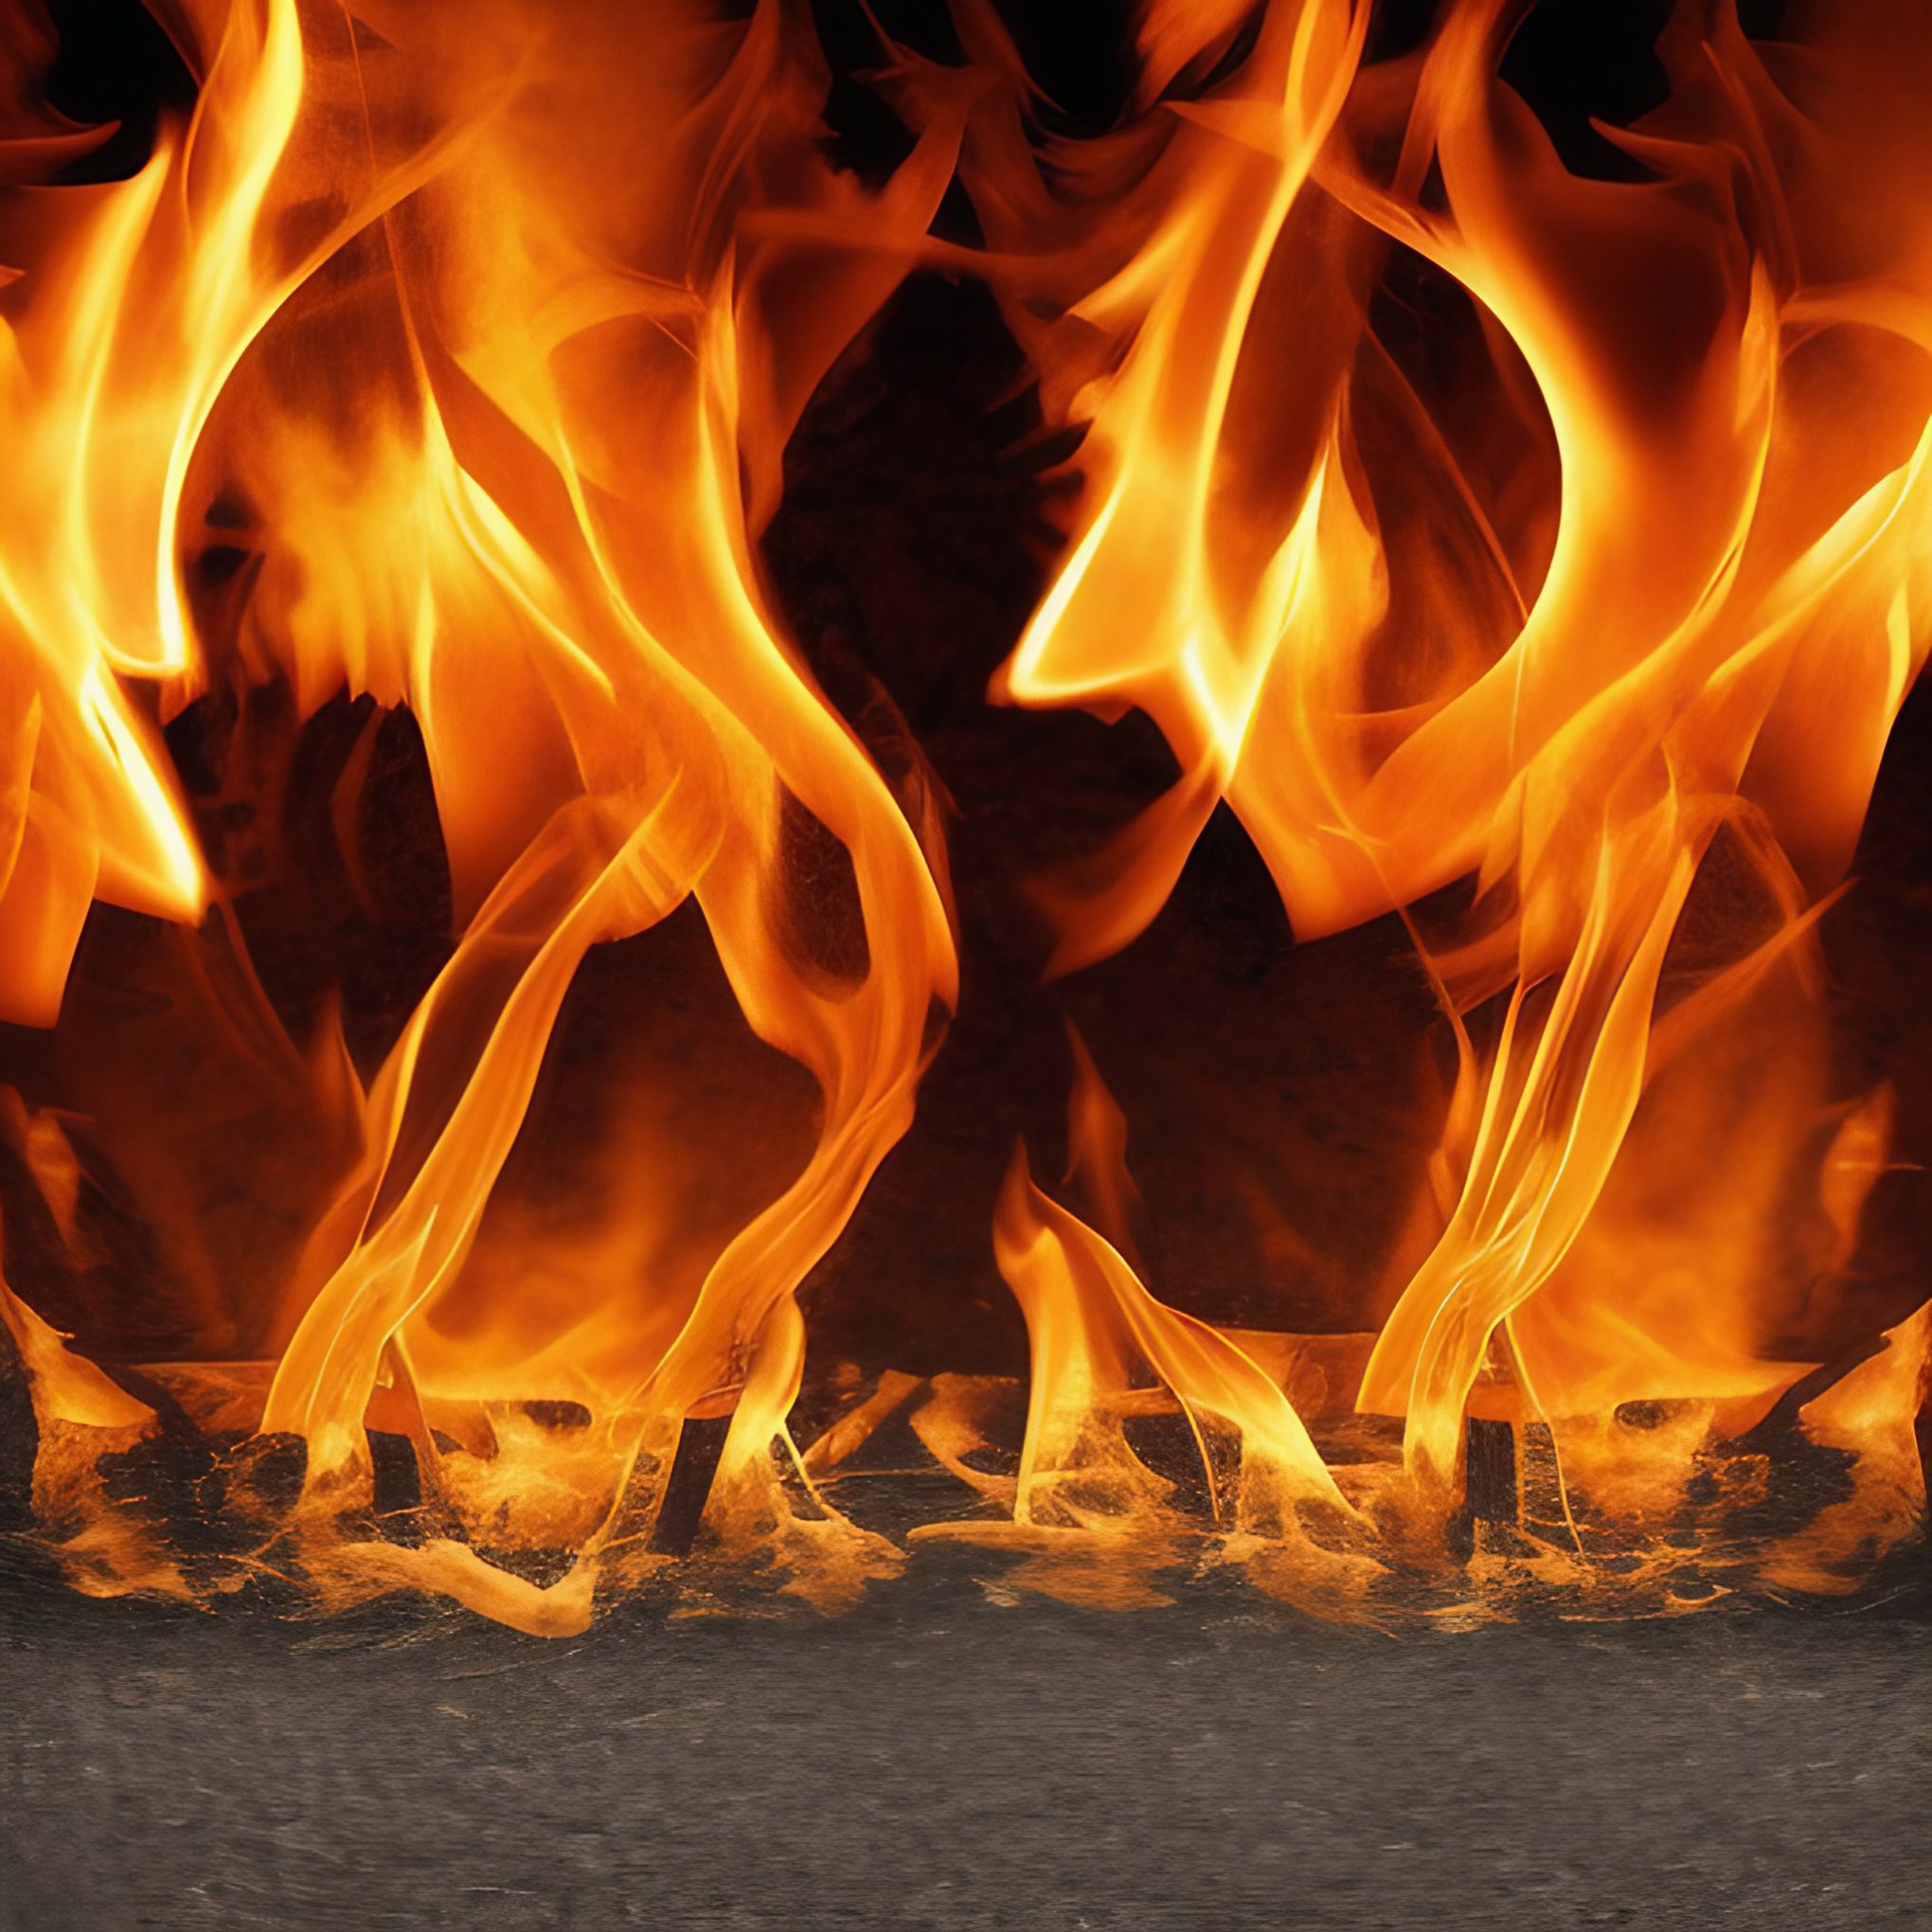 Ground on Fire with Orange Frames Stock Image